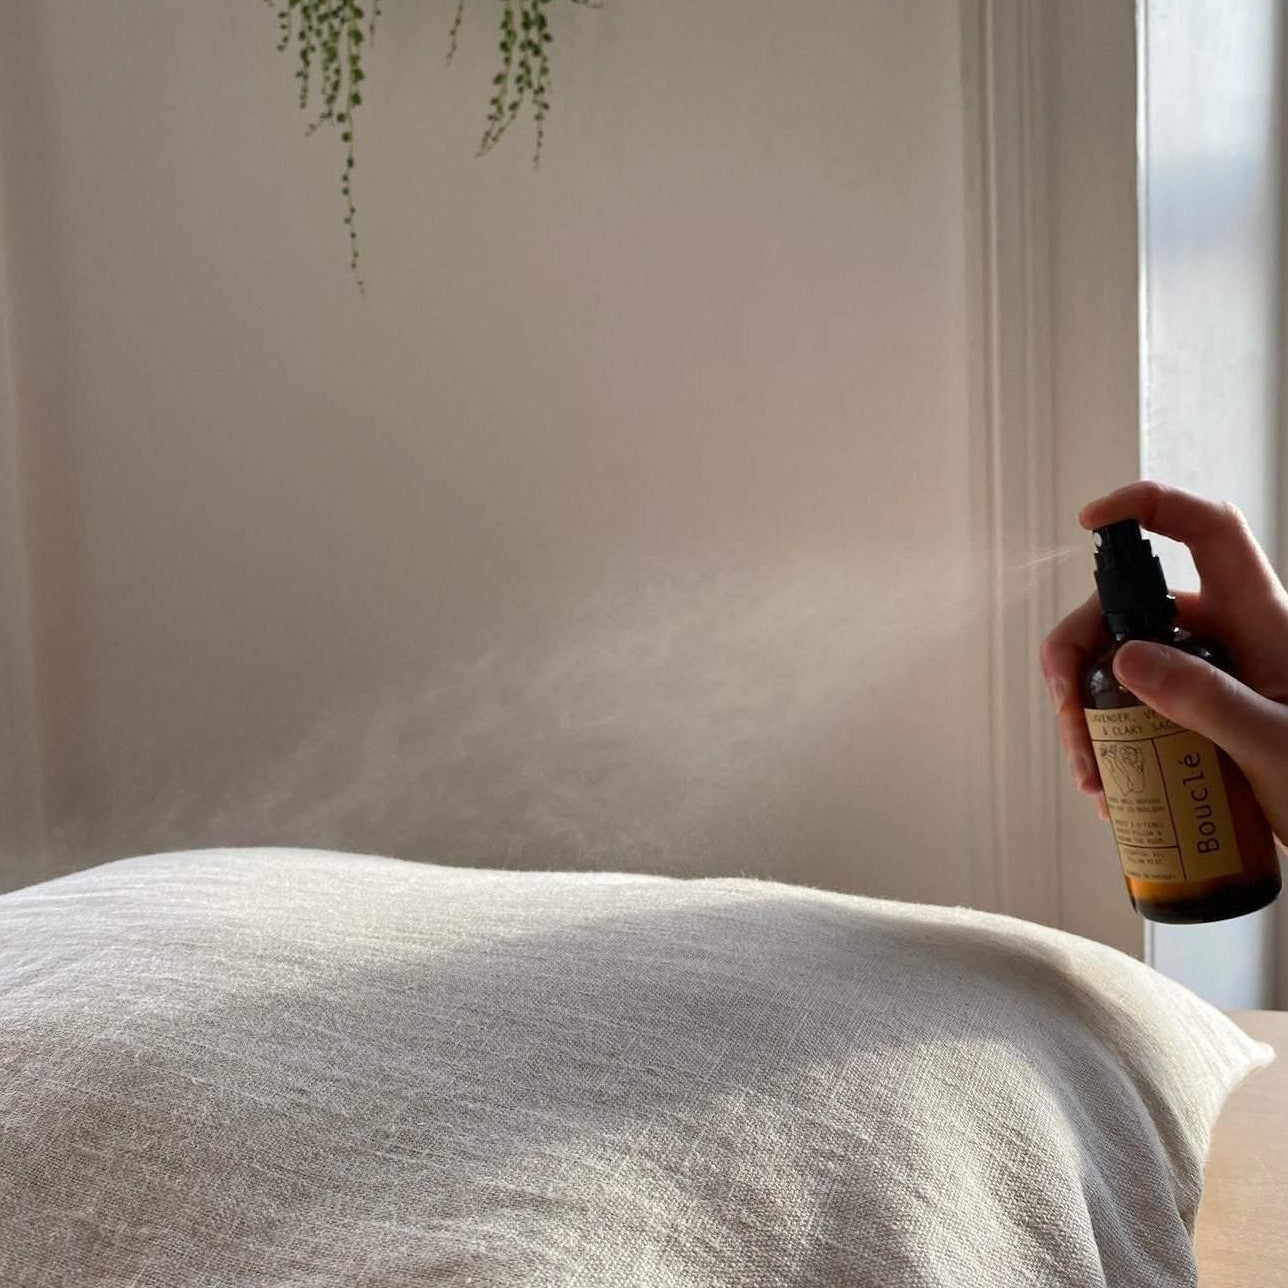 London linen spray being spritzed across pillow as natural sleep aid.